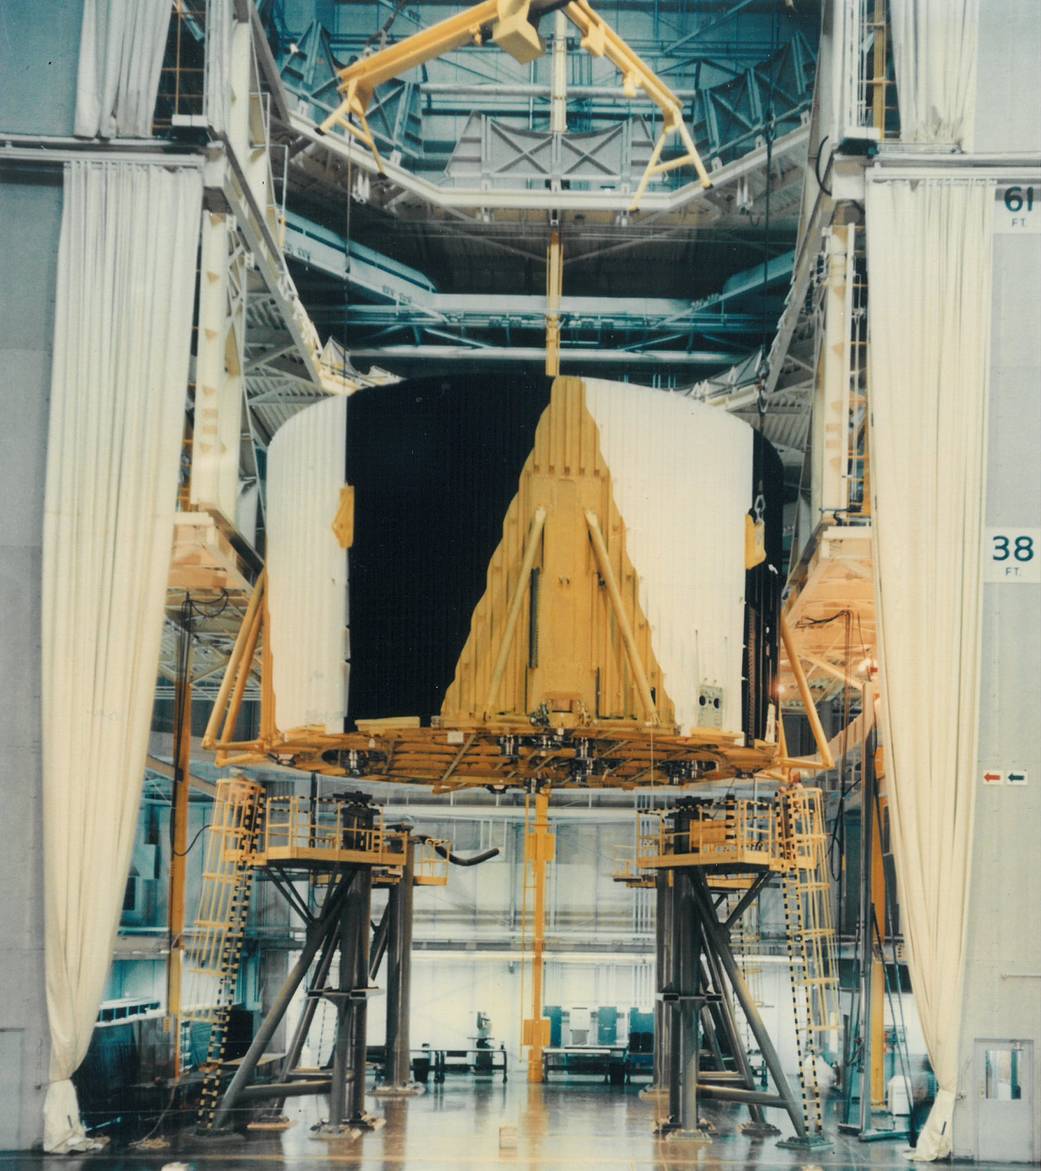 This week in 1965, technicians at NASA’s Michoud Assembly Facility installed the S-IC-D thrust structure.